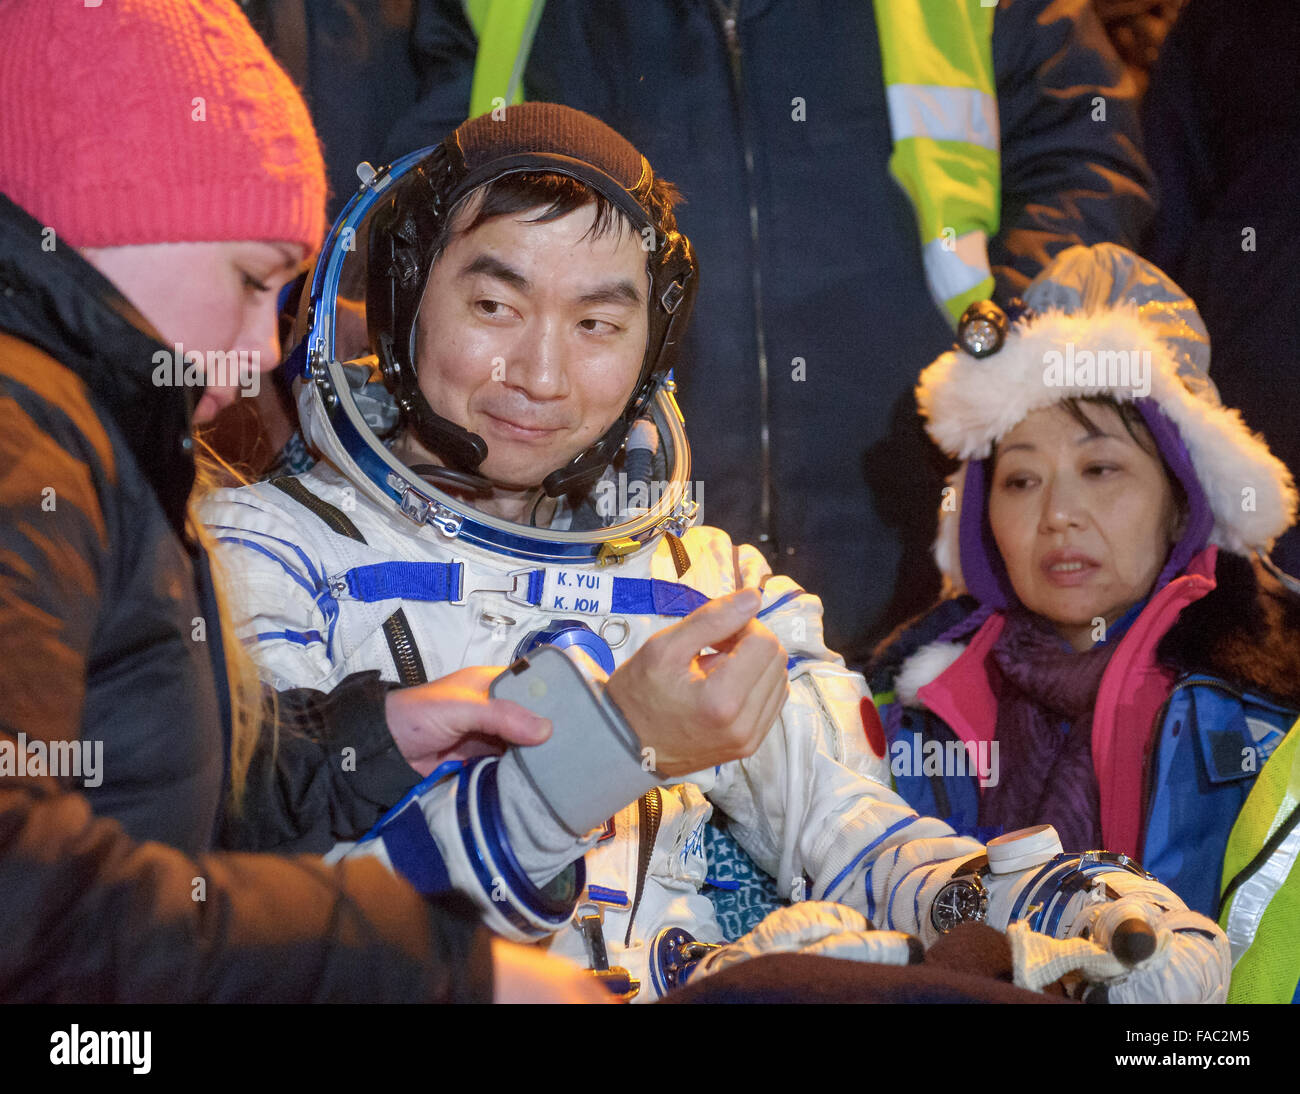 International Space Station Expedition 45 crew member Japanese astronaut Kimya Yui of the Japan Aerospace Exploration Agency has his medical check moments after landing in a remote area in the Soyuz TMA-17M spacecraft December 11, 2015 near Zhezkazgan, Kazakhstan. The crew is returning after 141 days onboard the International Space Station. Stock Photo